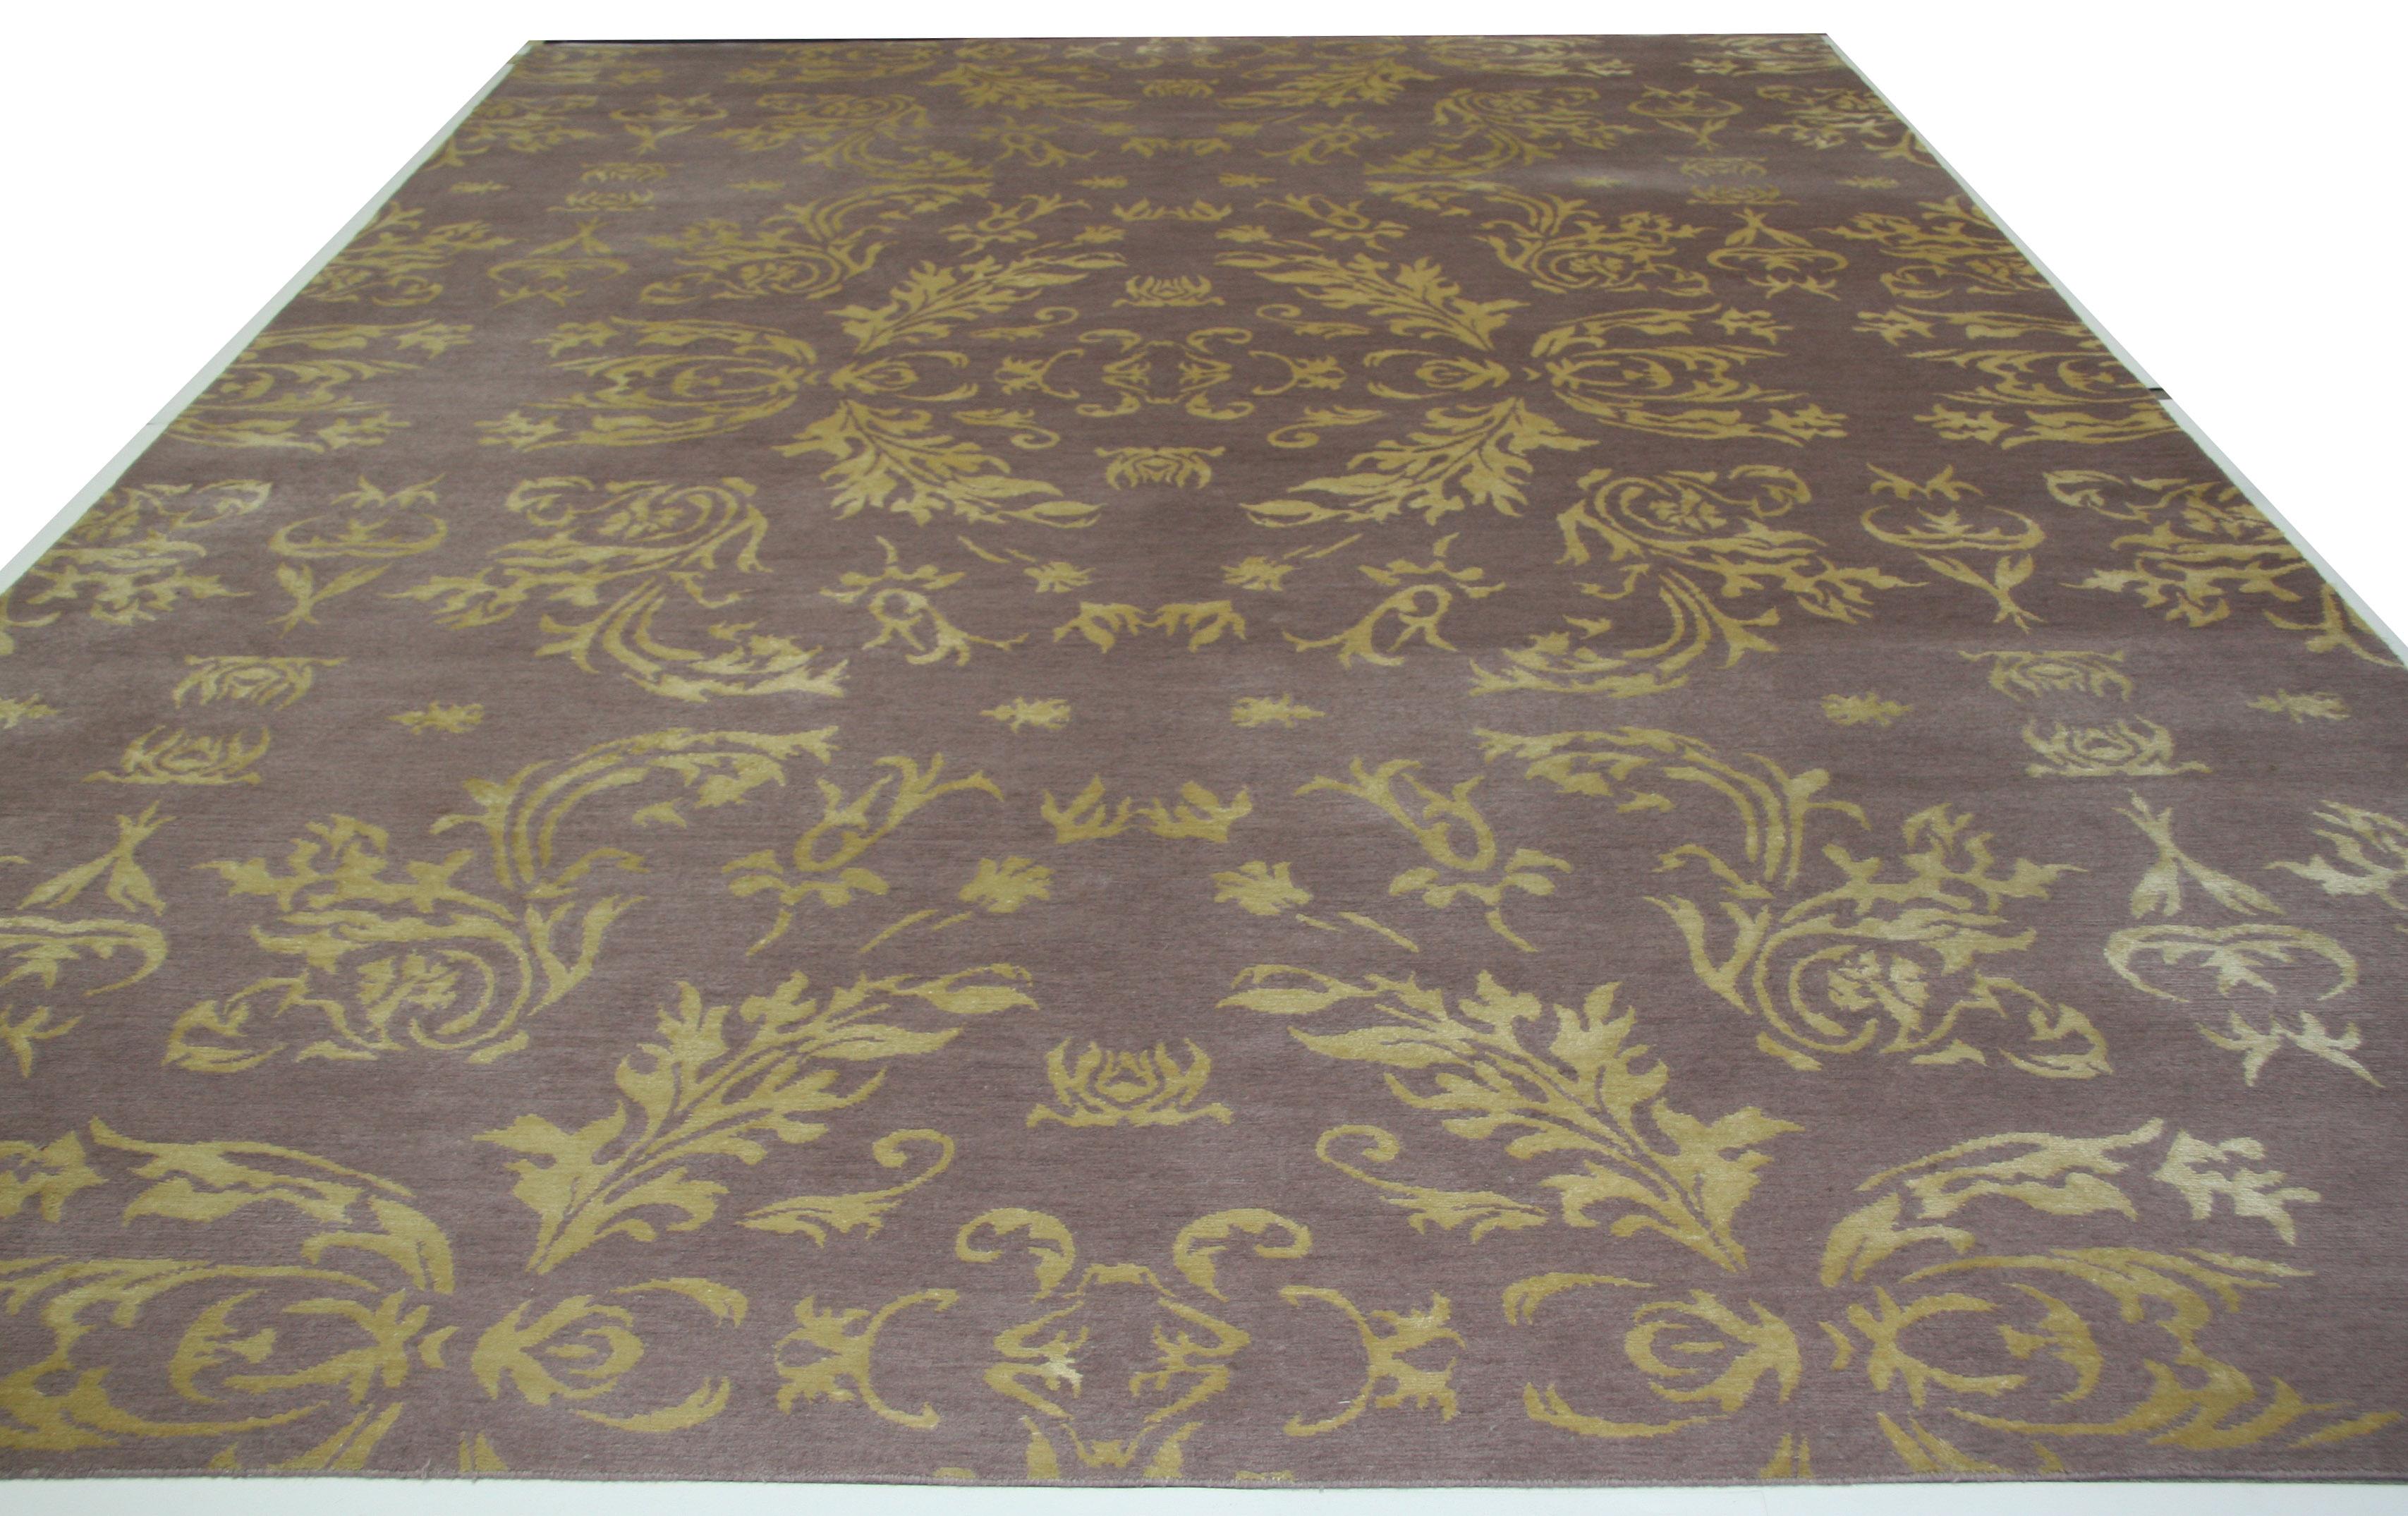 Bold colors and a beautiful flowing floral design come together to create an elegant wool area rug. While the floral pattern creates an expansive piece, a center 'medallion' of leaves also offers an opportunity for a focal point around which to